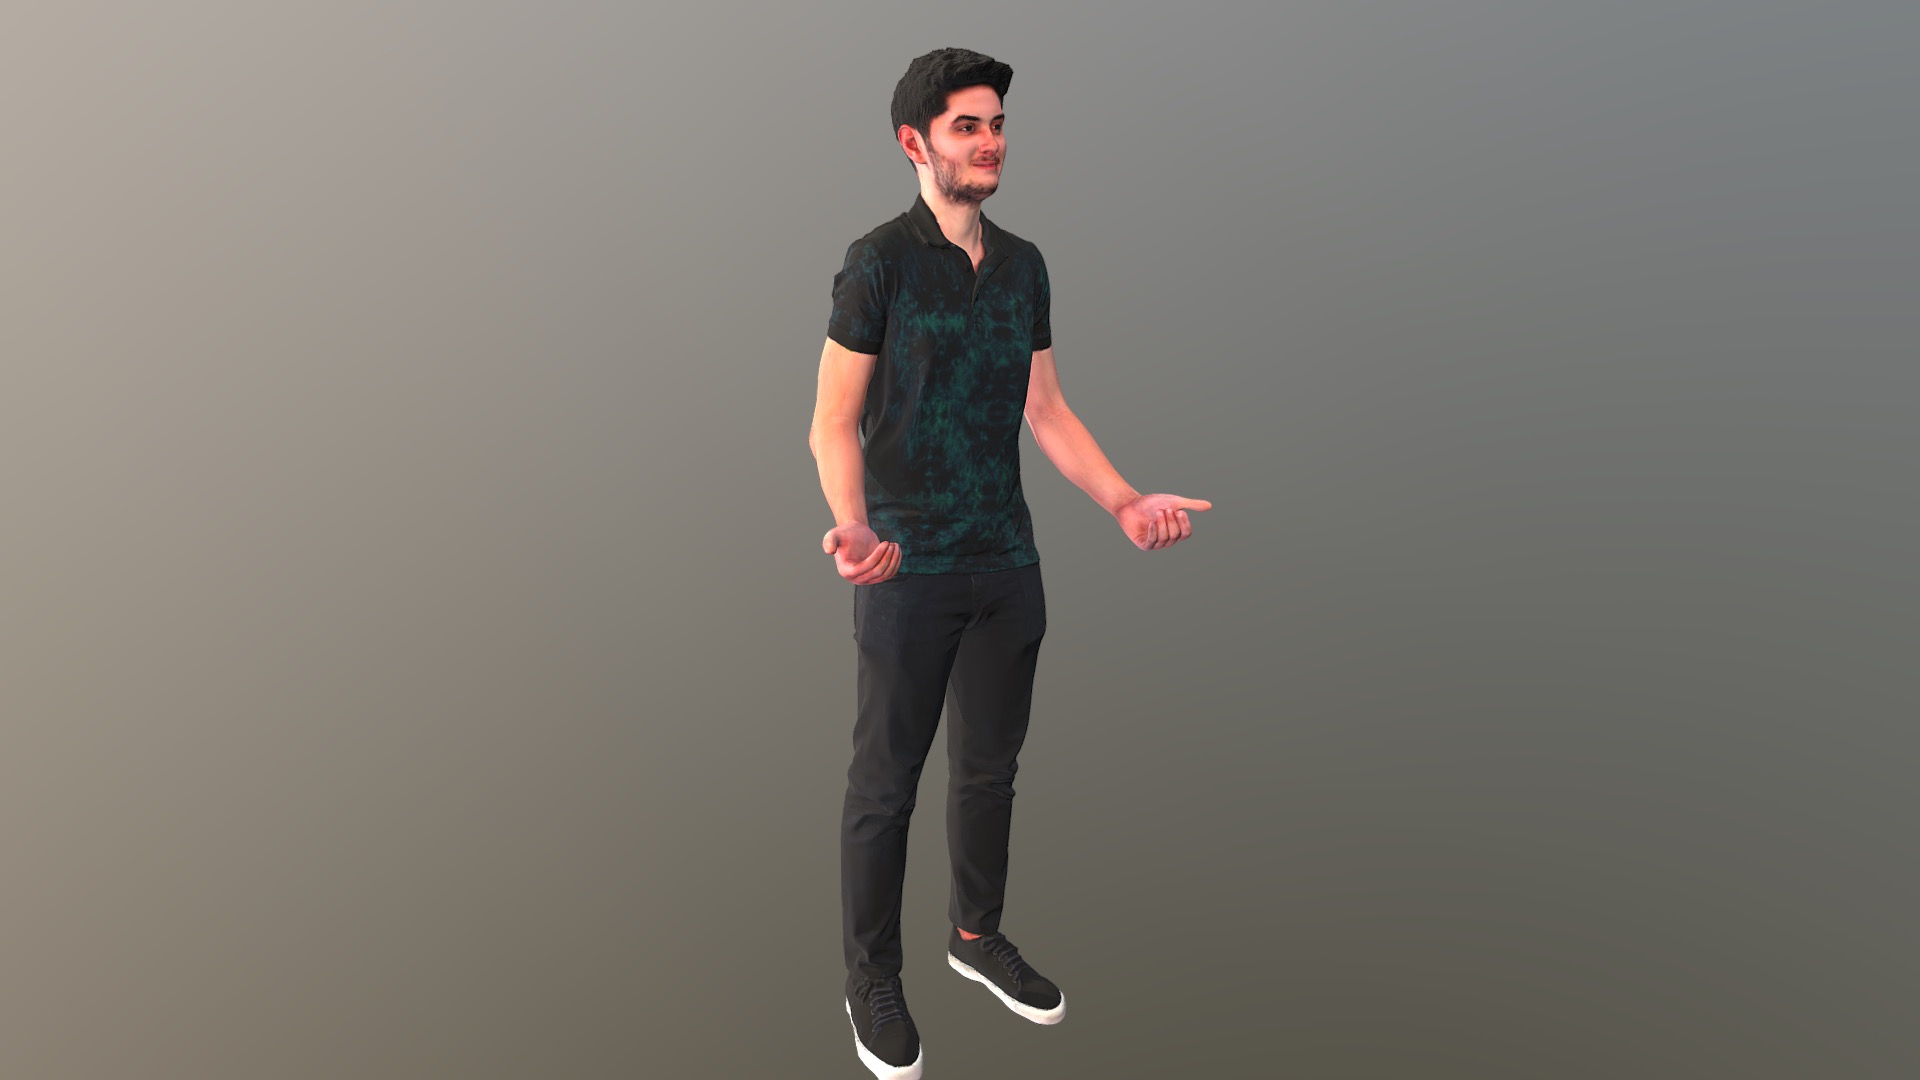 3D model No33 – Holder Guy - This is a 3D model of the No33 - Holder Guy. The 3D model is about a man in a black shirt.